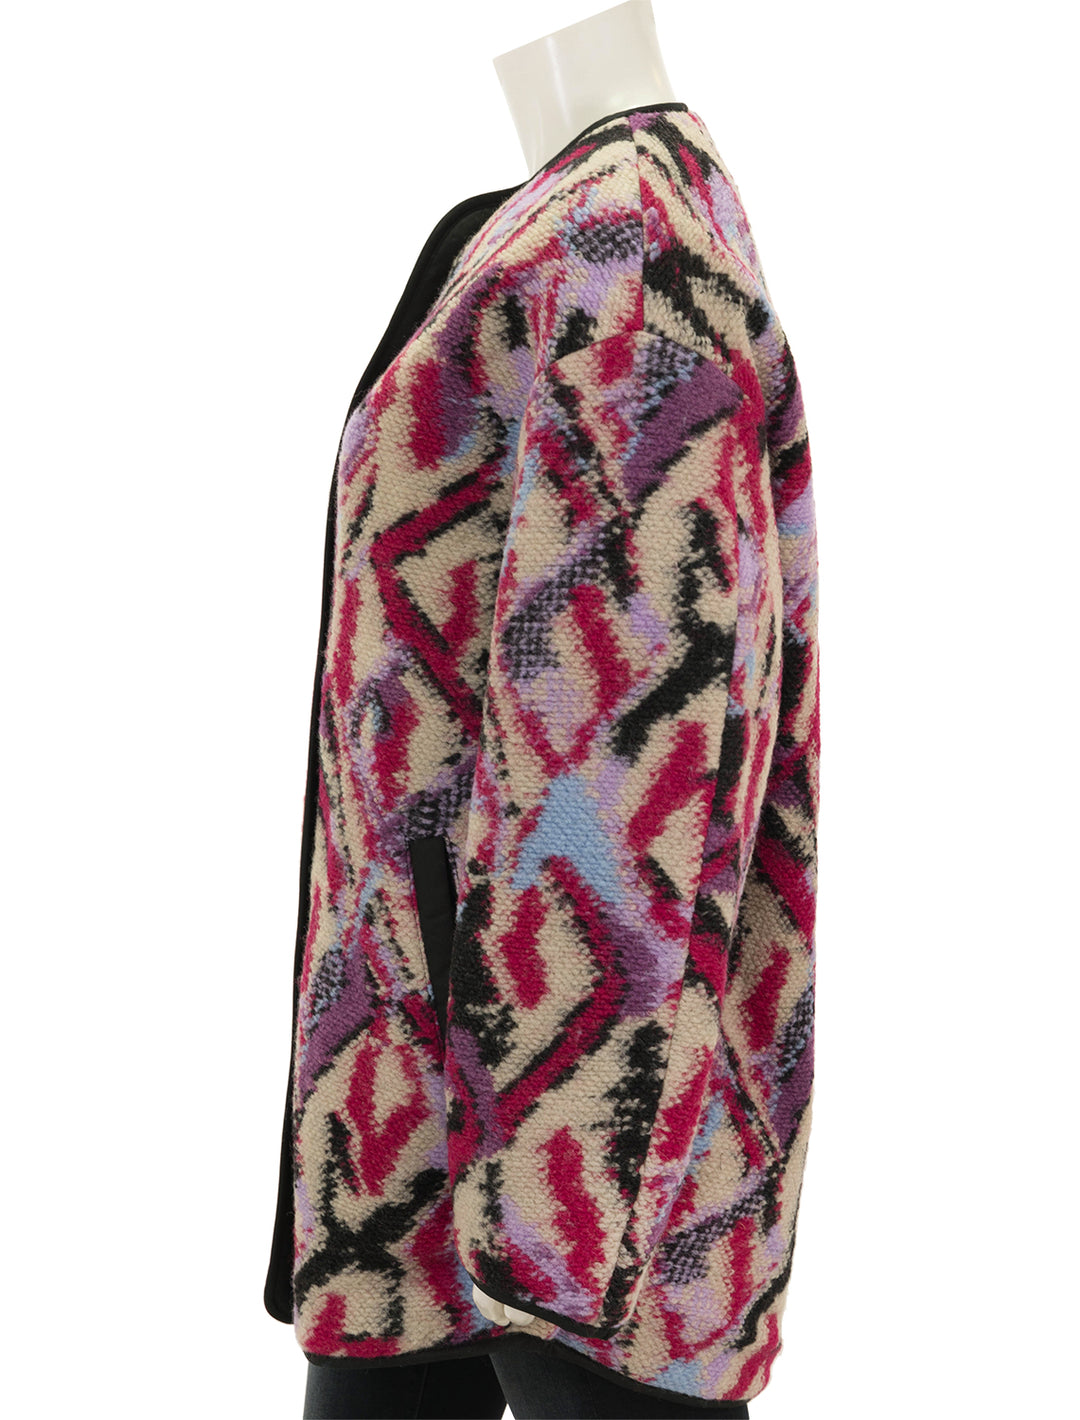 Side view of Isabel Marant Étoile's Himemma Jacket in Fuchsia.